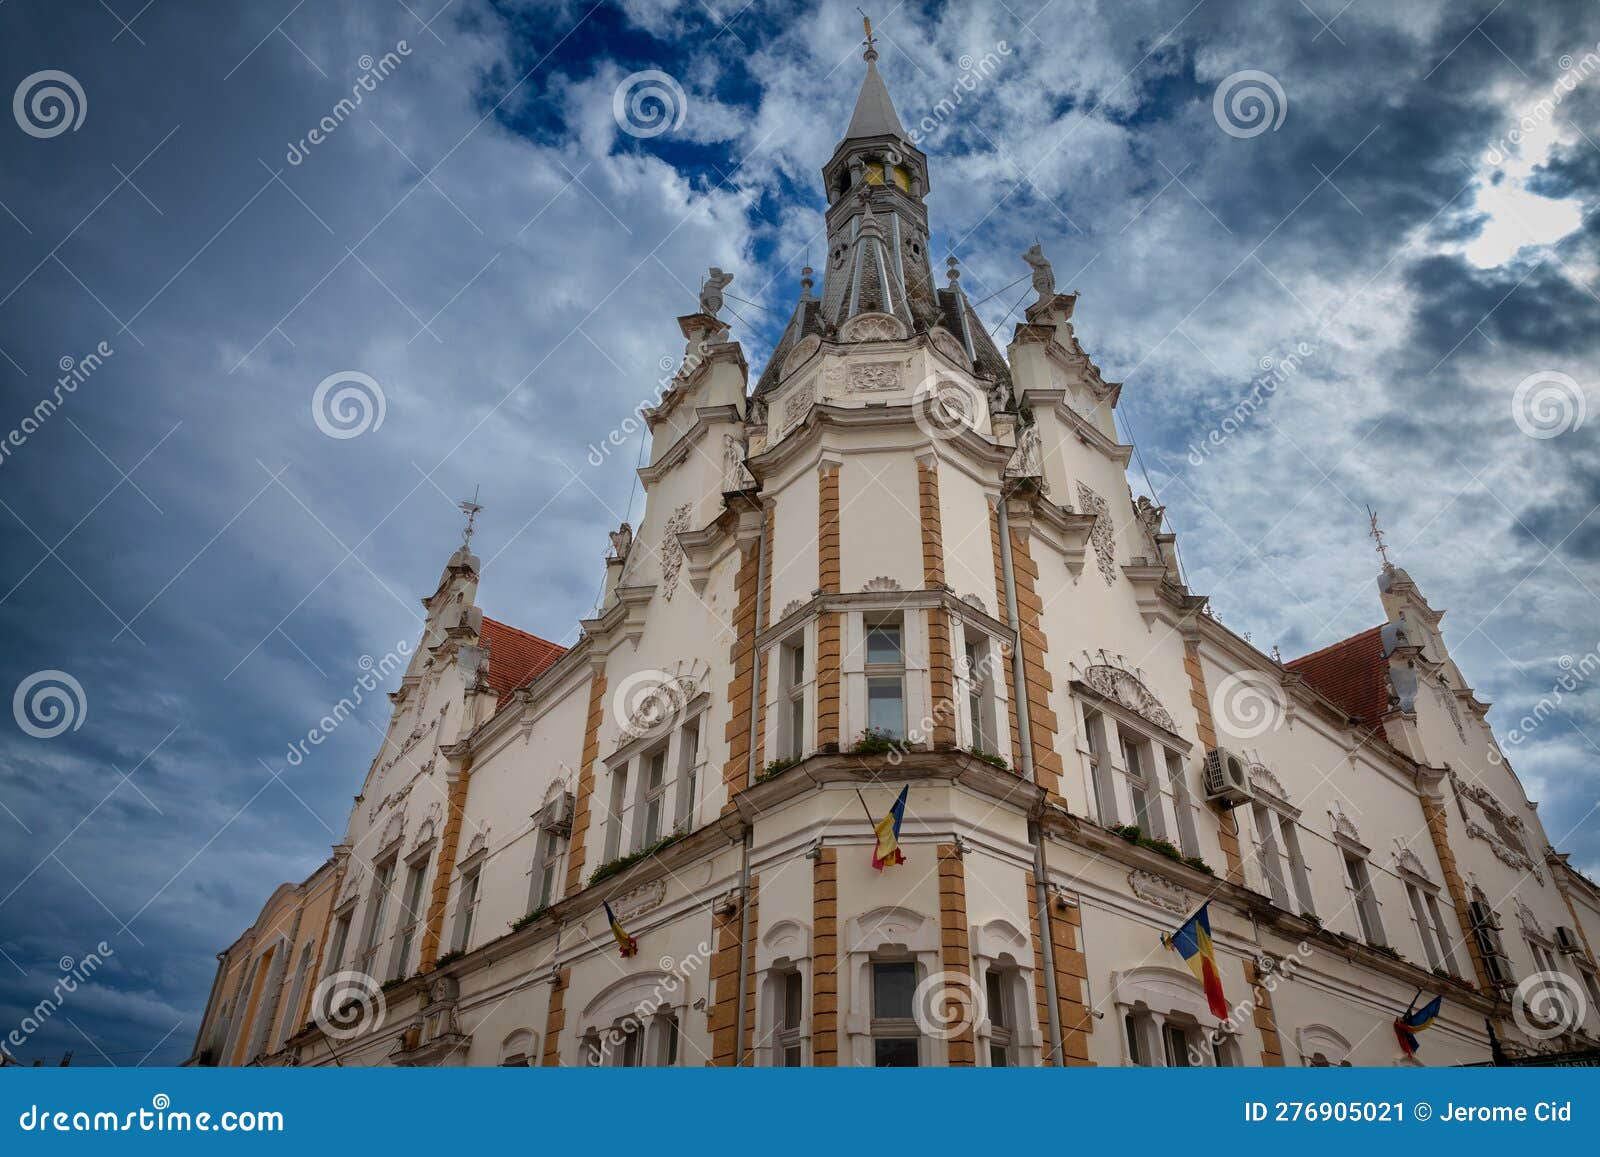 main facade of the city hall of caransebes, also called in romanian primaria municipului caransebes. it's a town of western